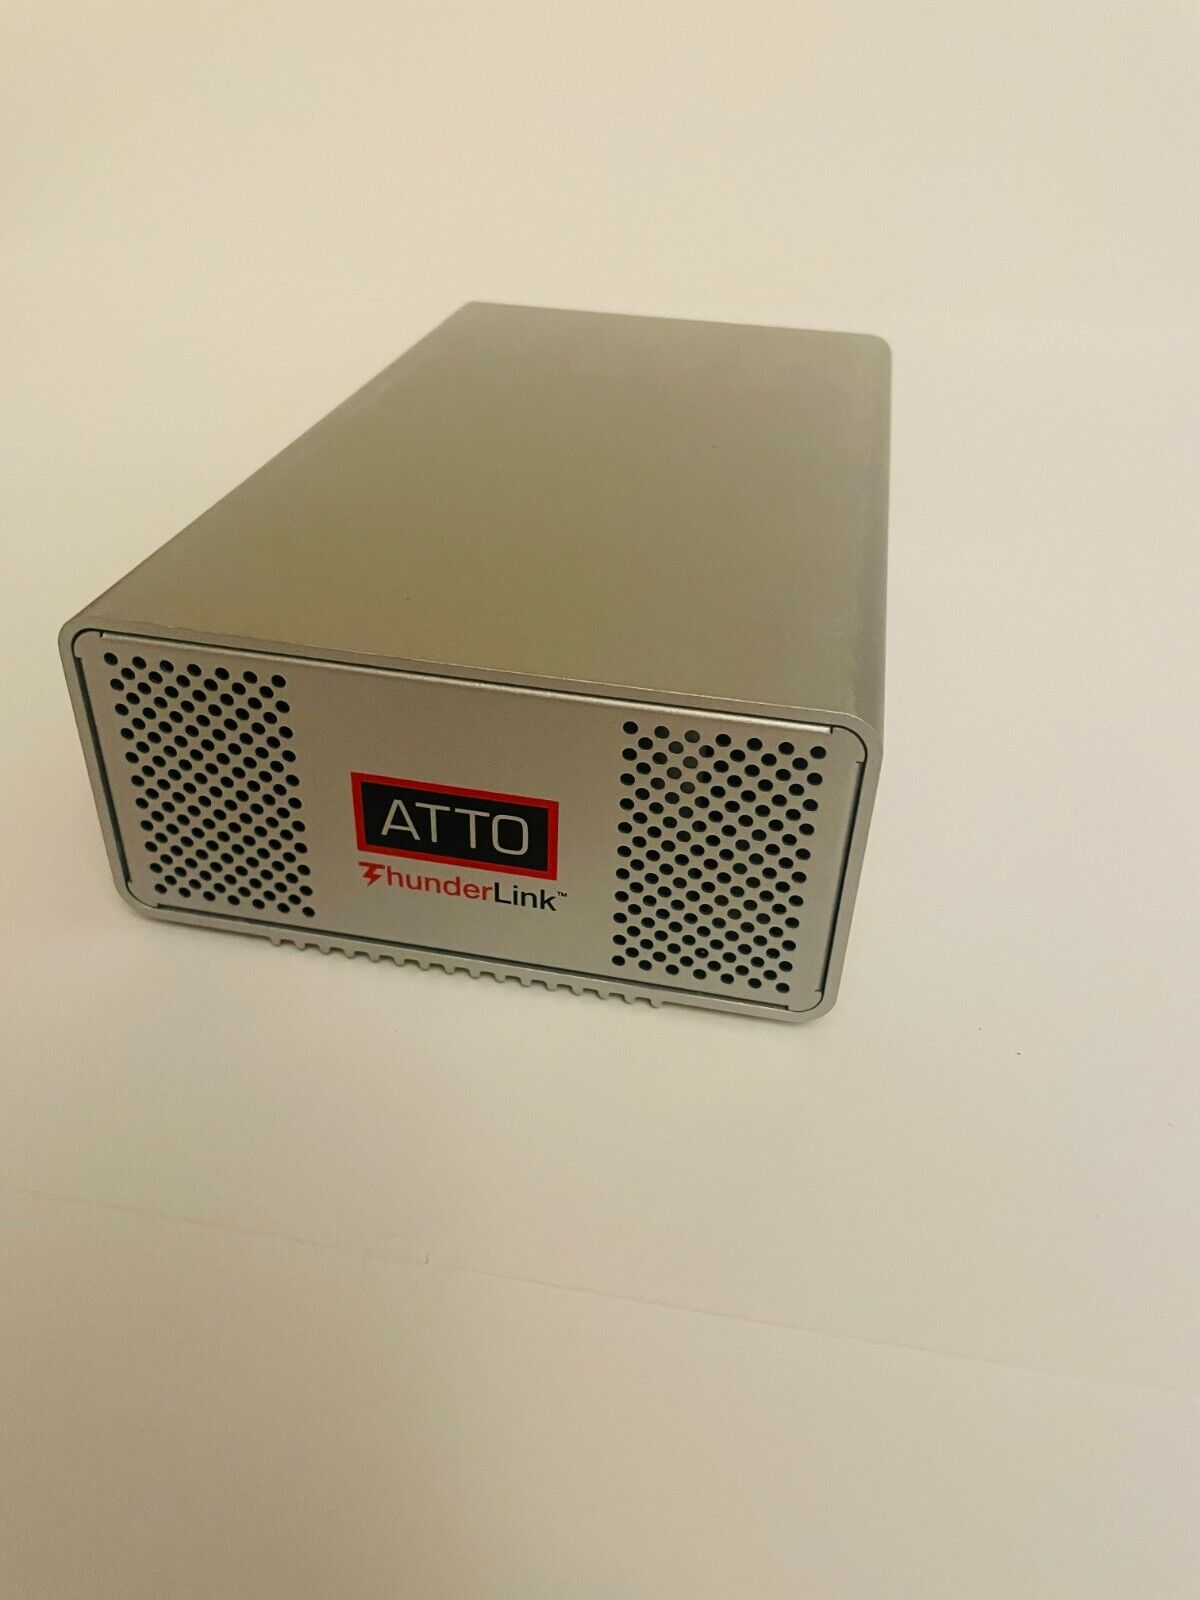 ATTO ThunderLink2 to 10GB NT 2102 10GBASE-T Adapter 